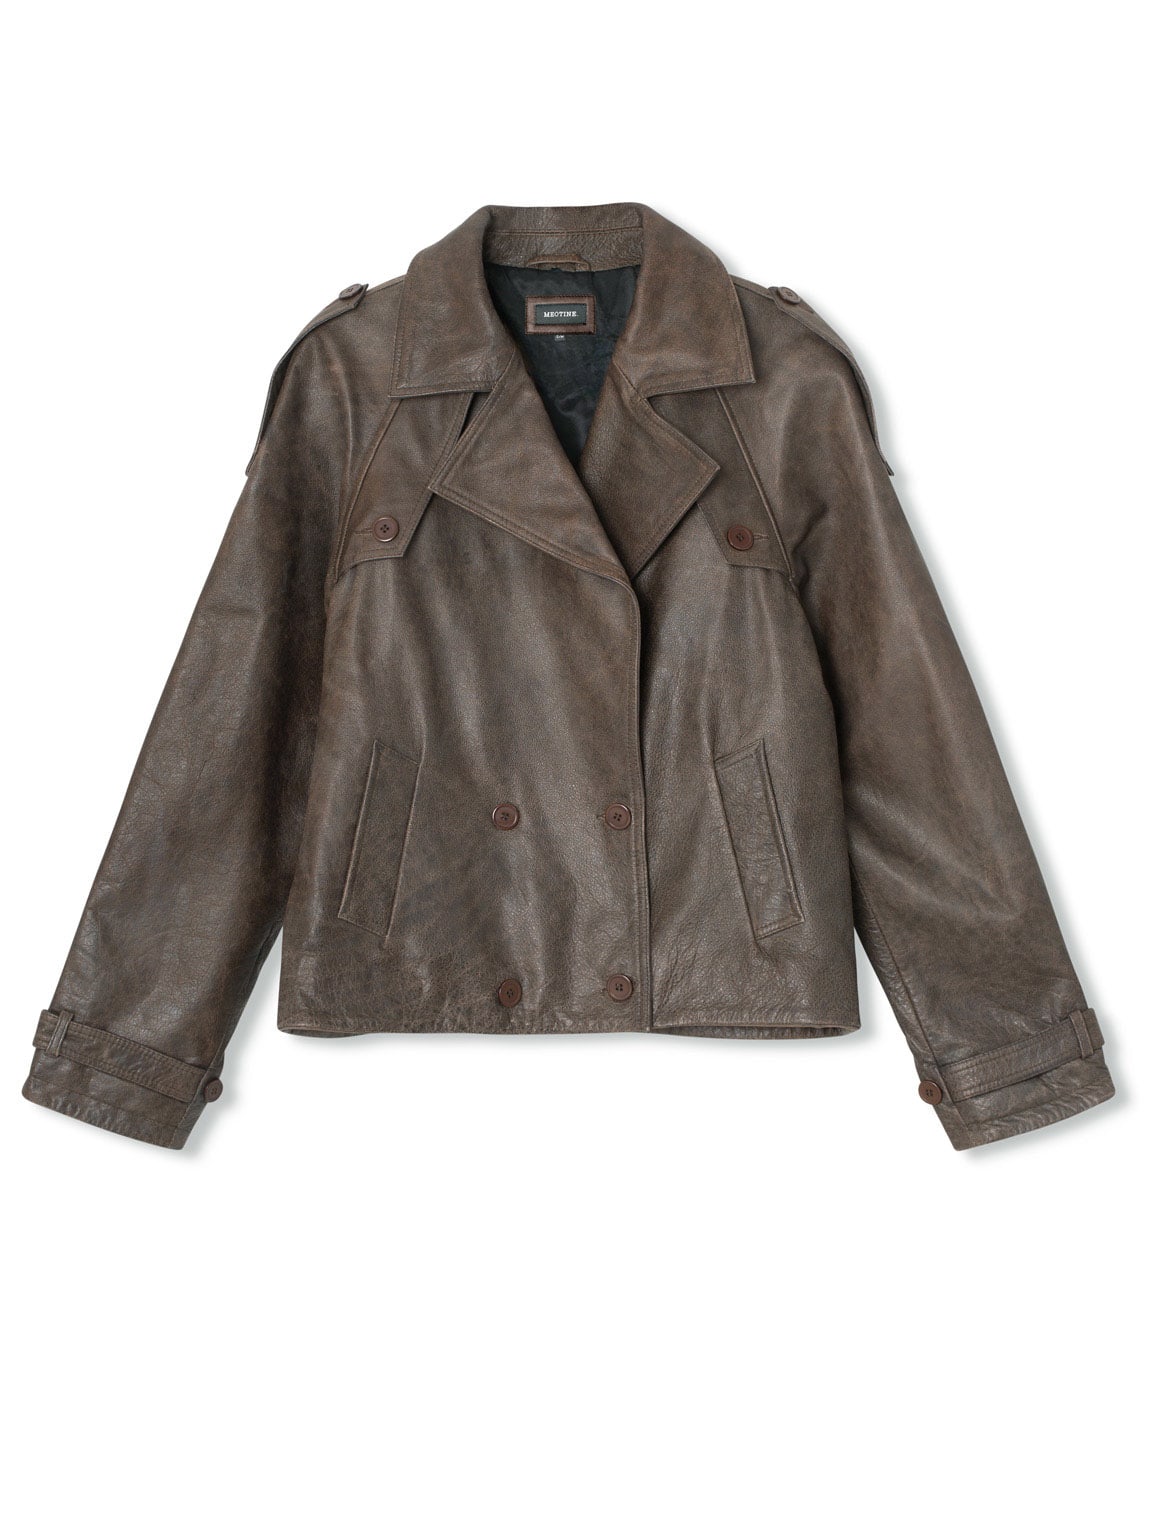 MOSS LEATHER JACKET - BROWN